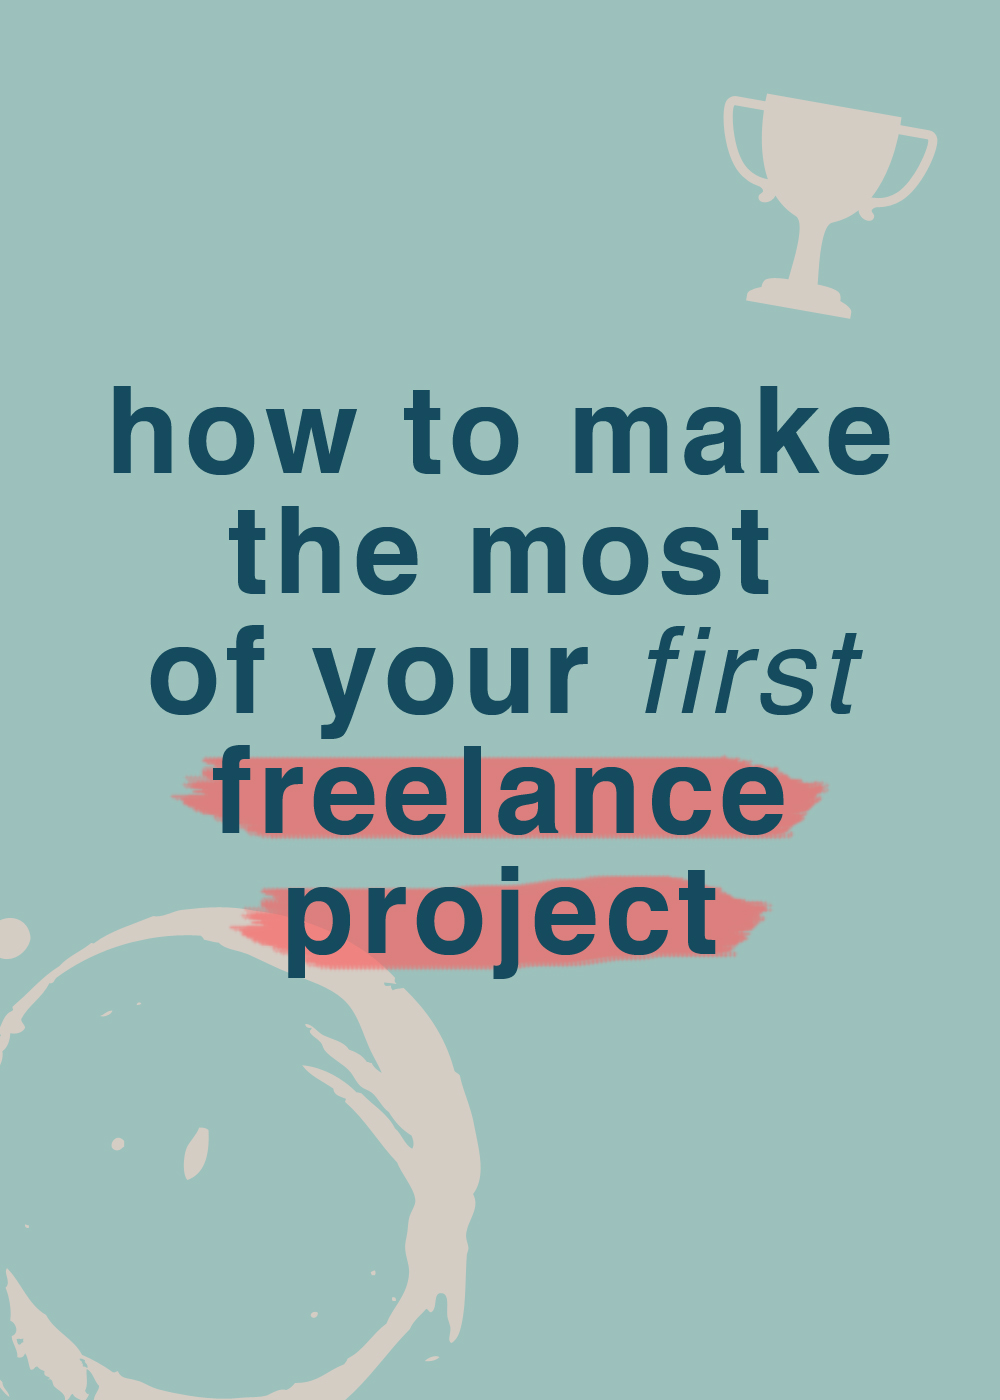 Make the most of your first freelance project so you can pave your way to self-employed success!